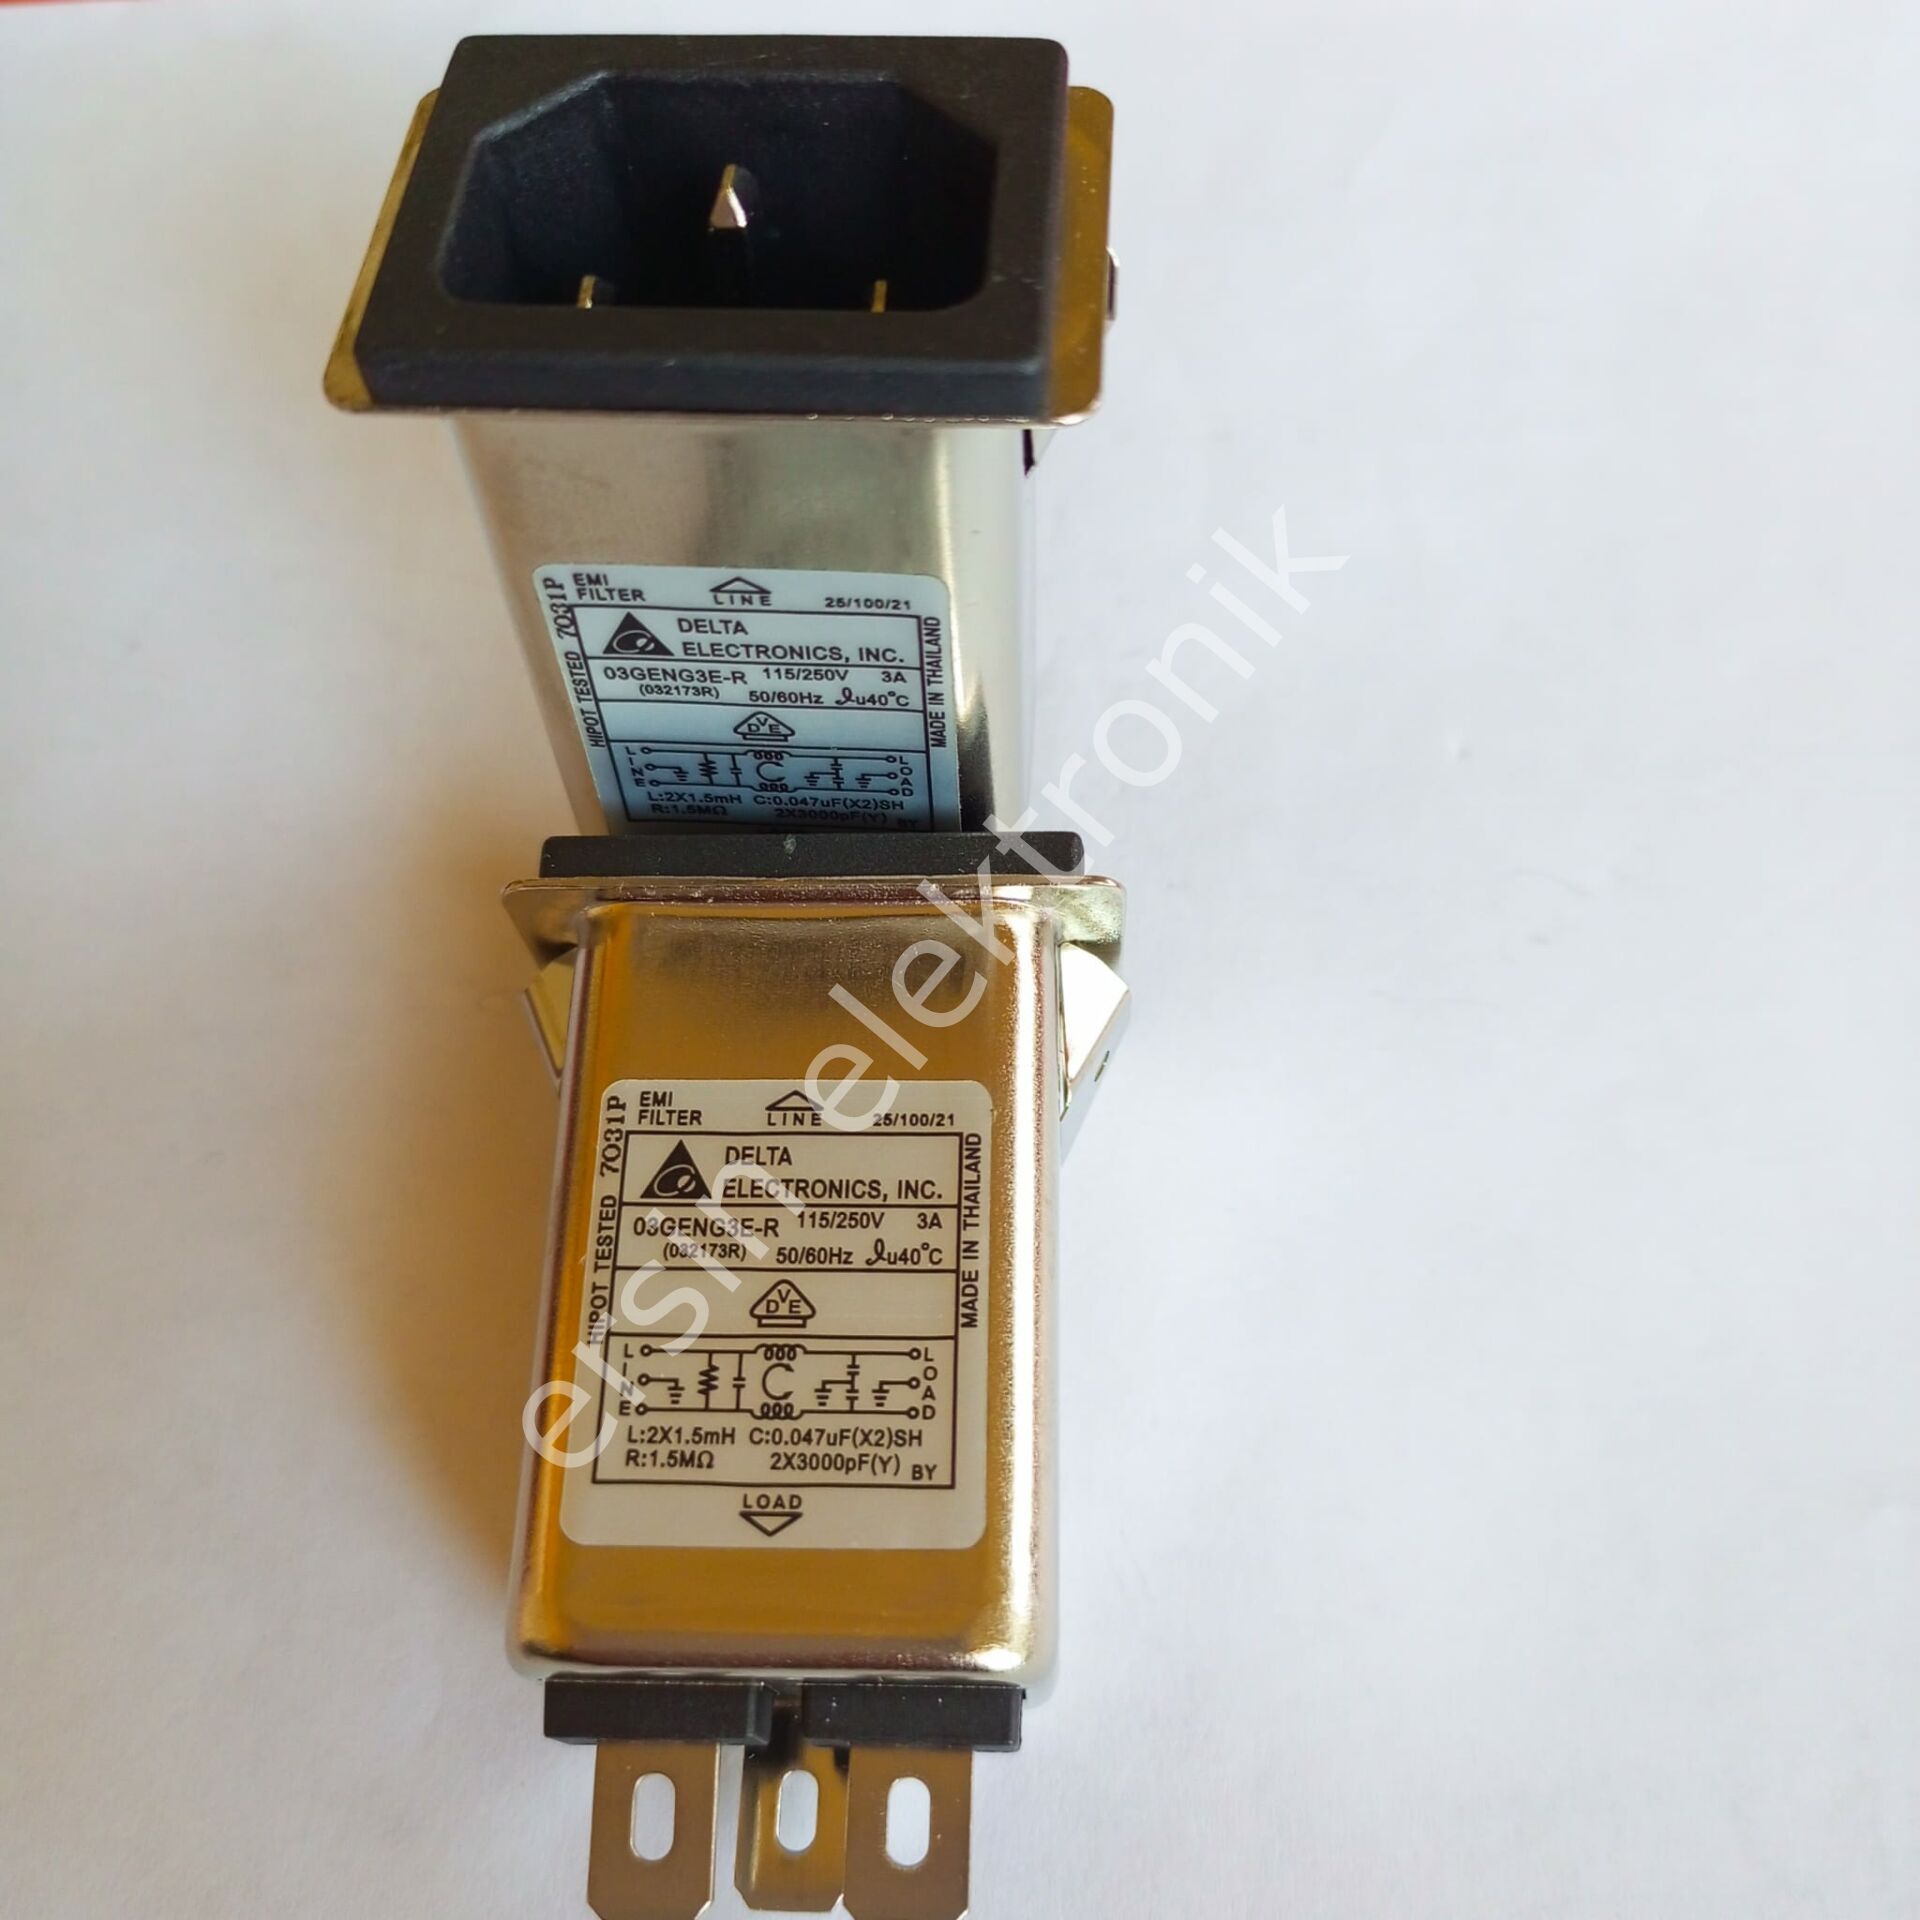 (3A) 03GENG3E-R (032173R) EMİ FİLTER 3A  115/250V Power Line Filter (Made in Thaıland)